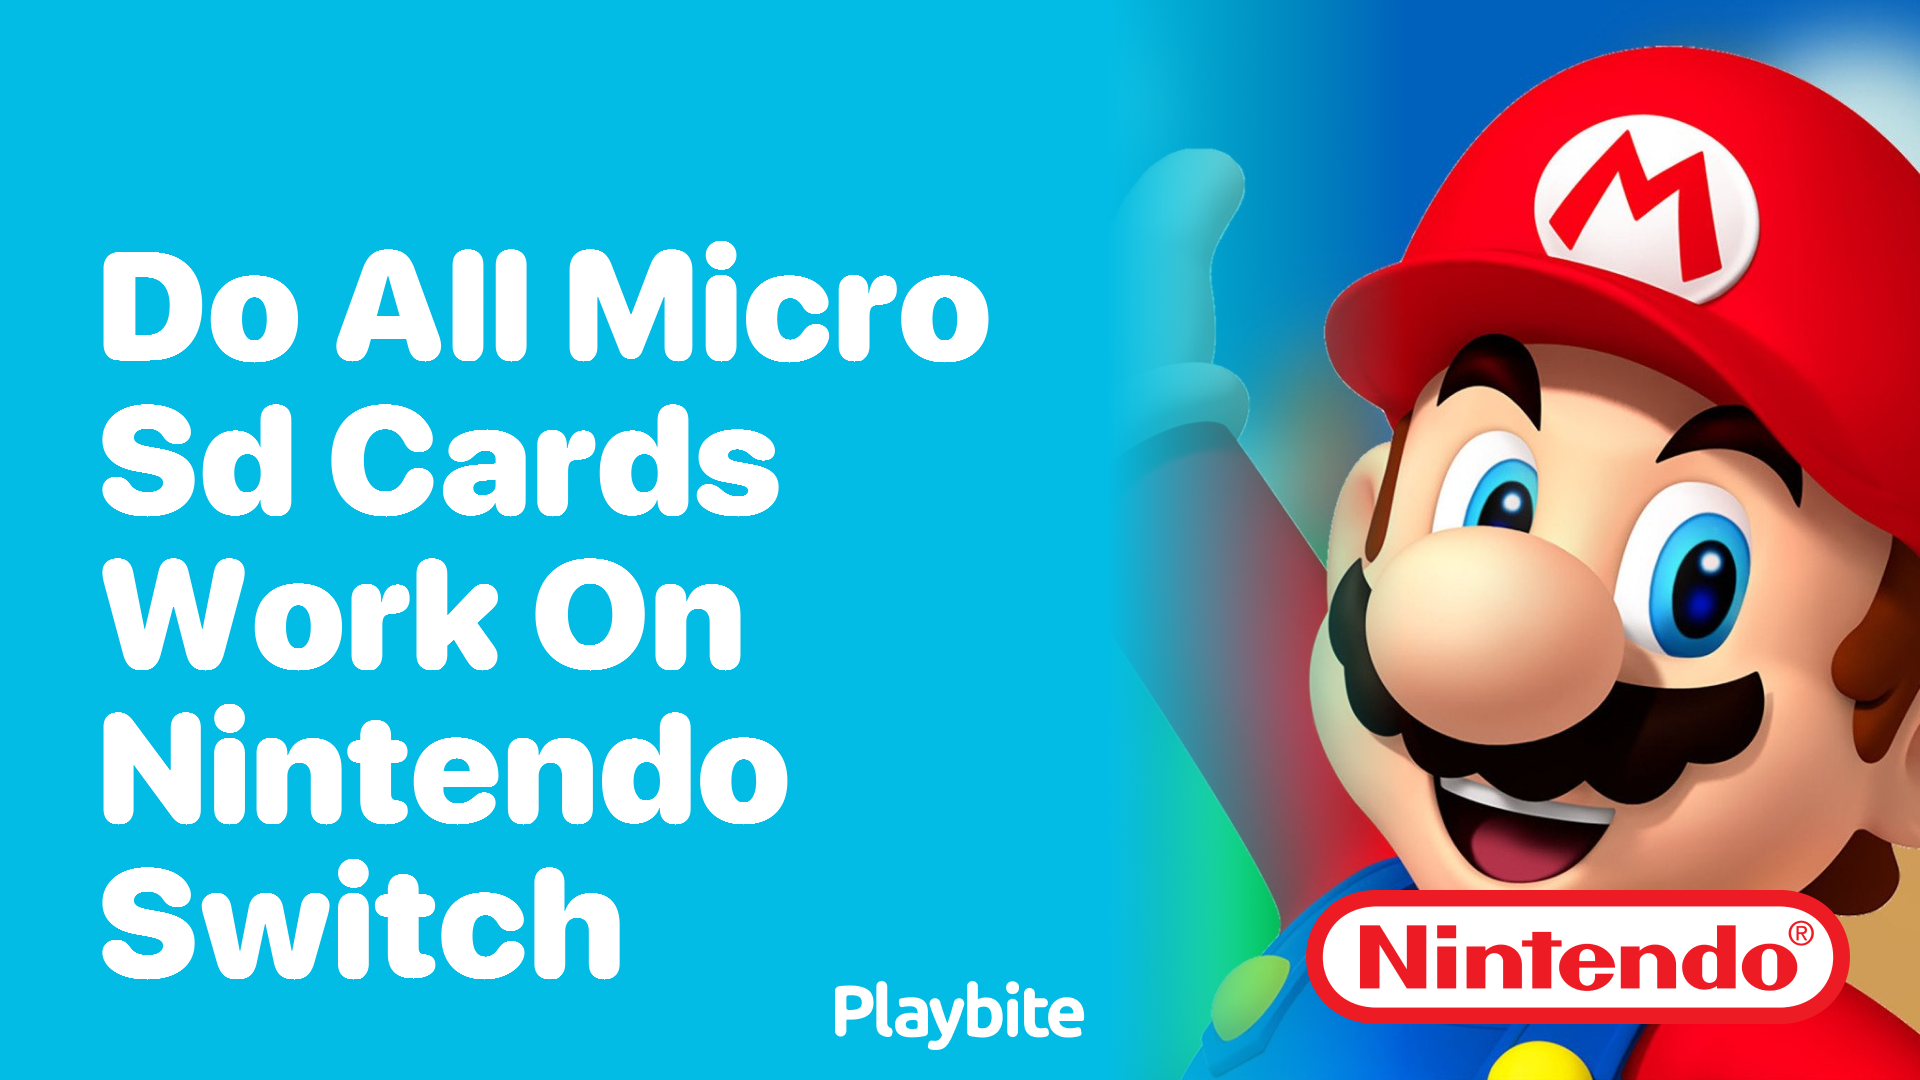 Do All Micro SD Cards Work on Nintendo Switch?